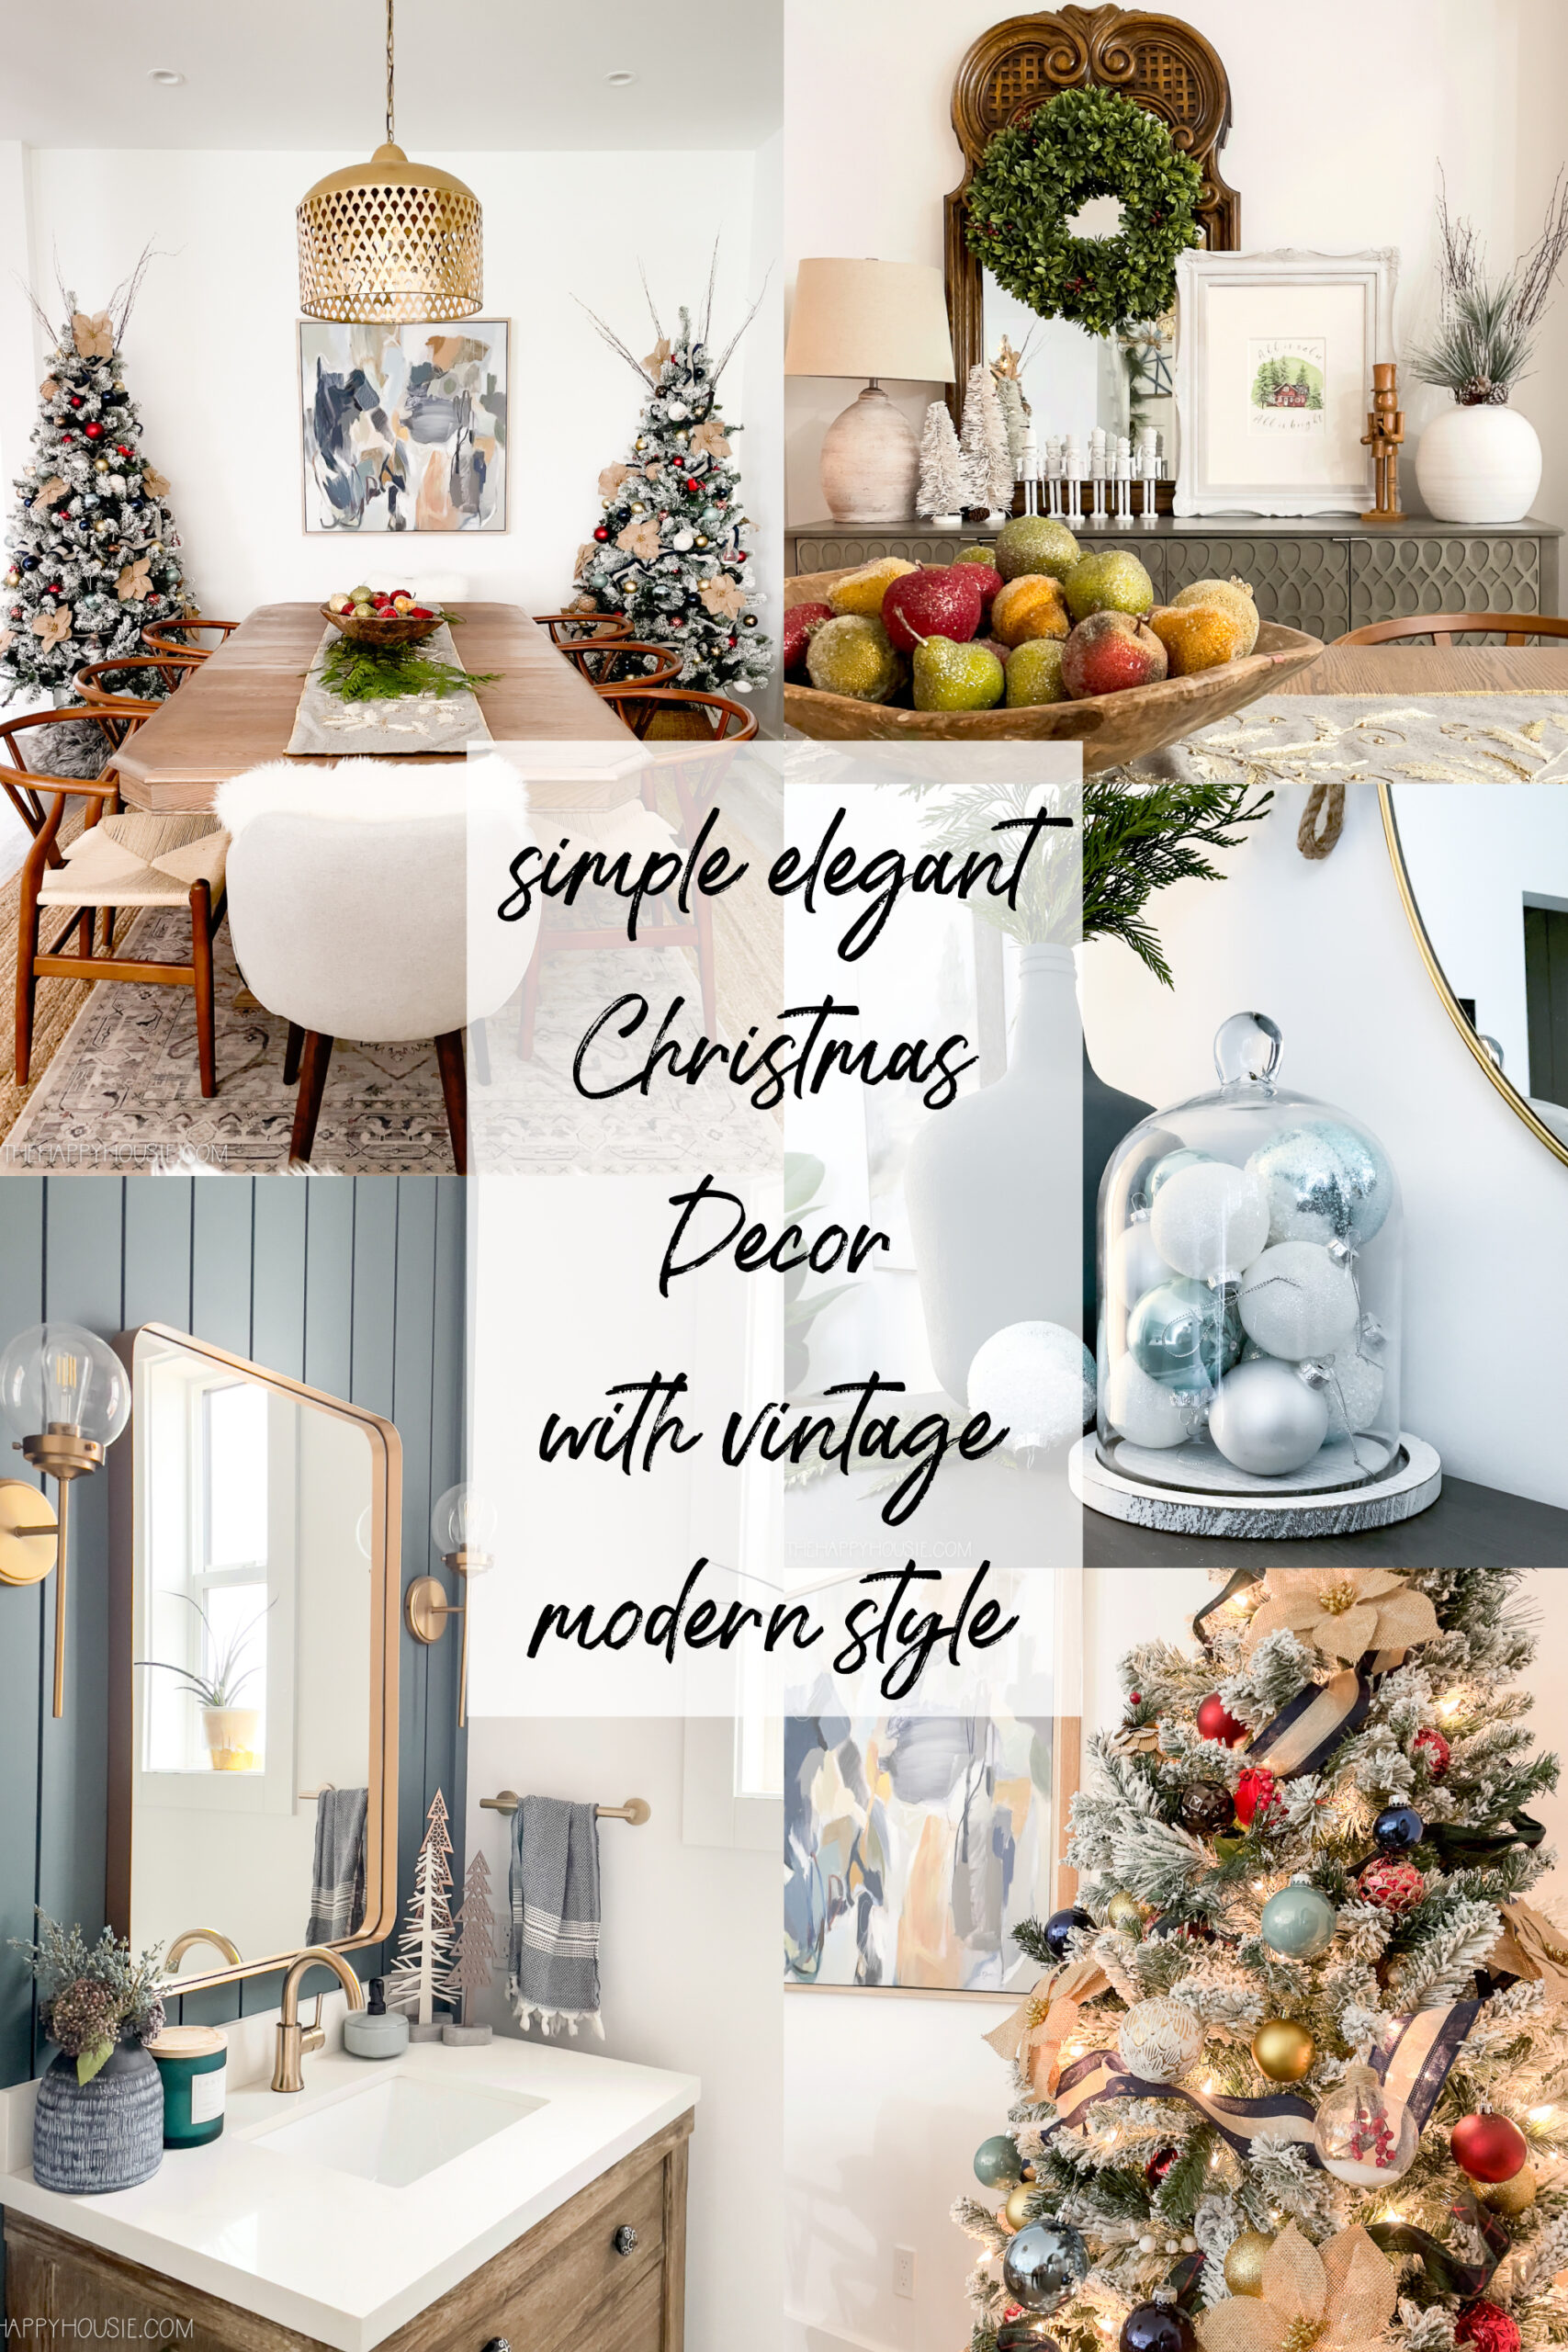 Simple Elegant Christmas Decor With Vintage Modern Style graphic.